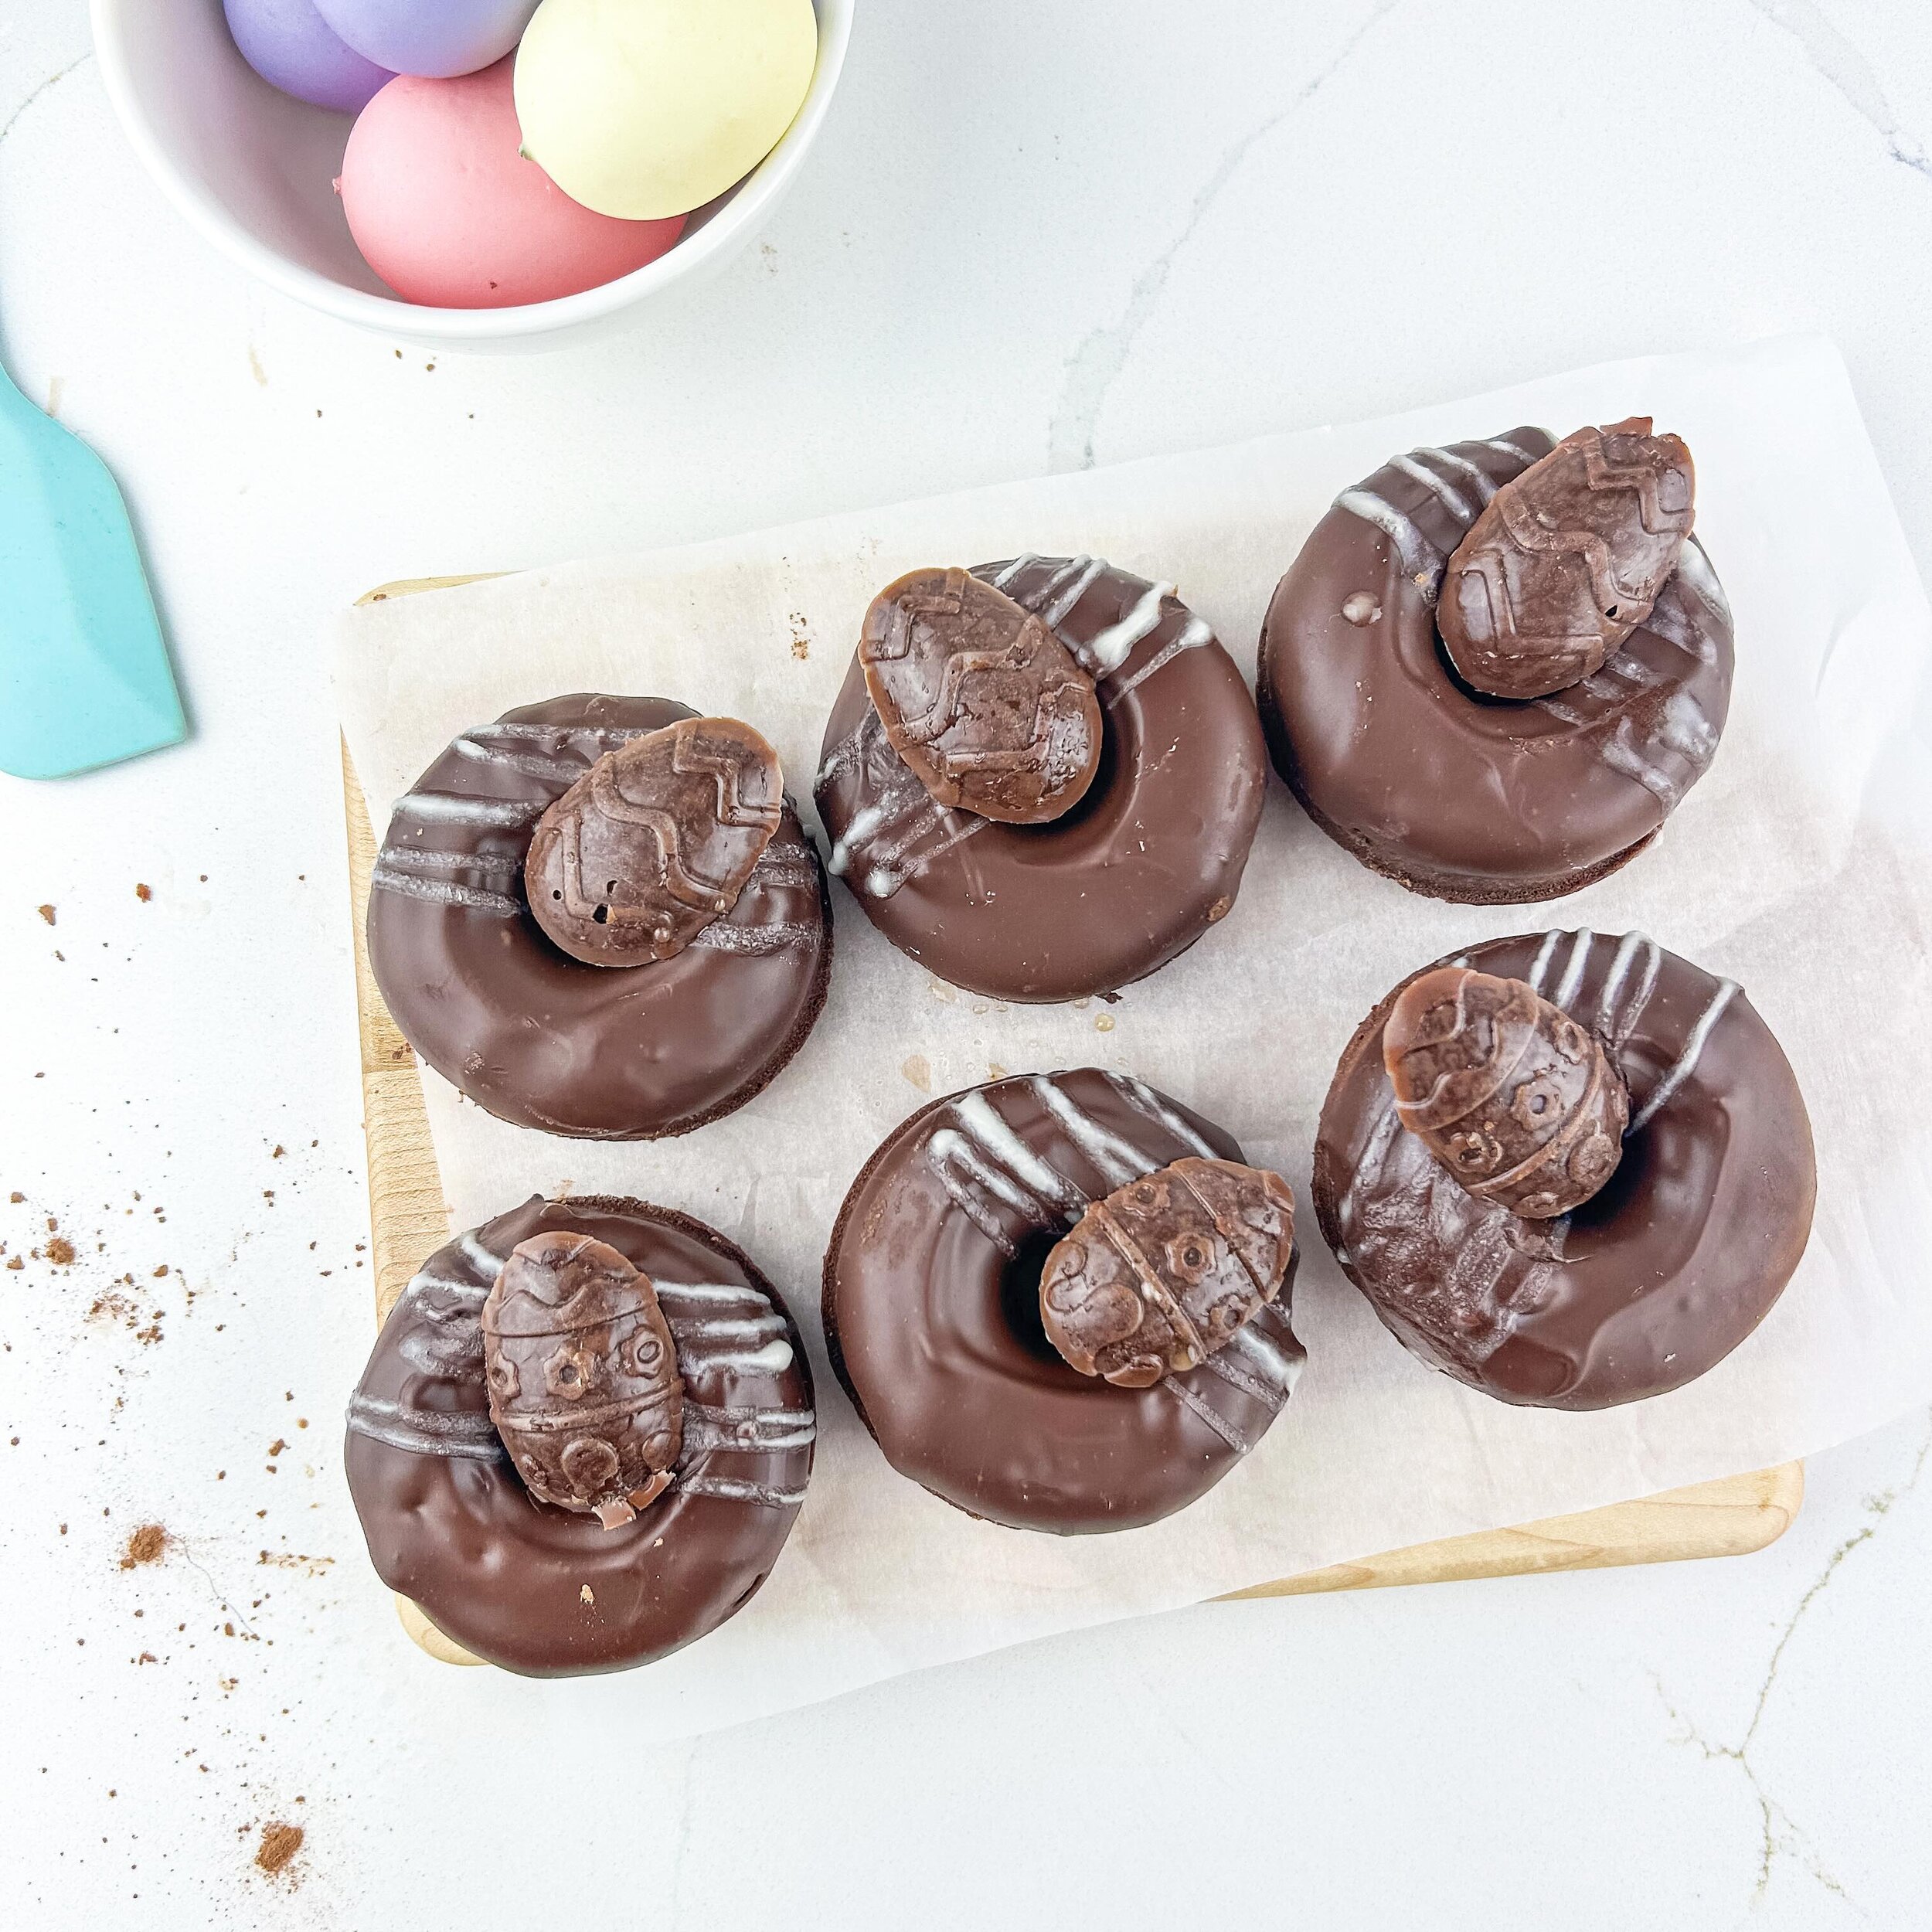 DOUBLE chocolate easter donuts! 🐣✨

A chocolate baked donut dipped in a creamy chocolate glaze. Topped with a chocolate easter egg. Vegan &amp; Gluten Free!

#TheHumbleKitchen #easterspecials #easterdonuts #veganandglutenfree #doublechocolatedonuts 